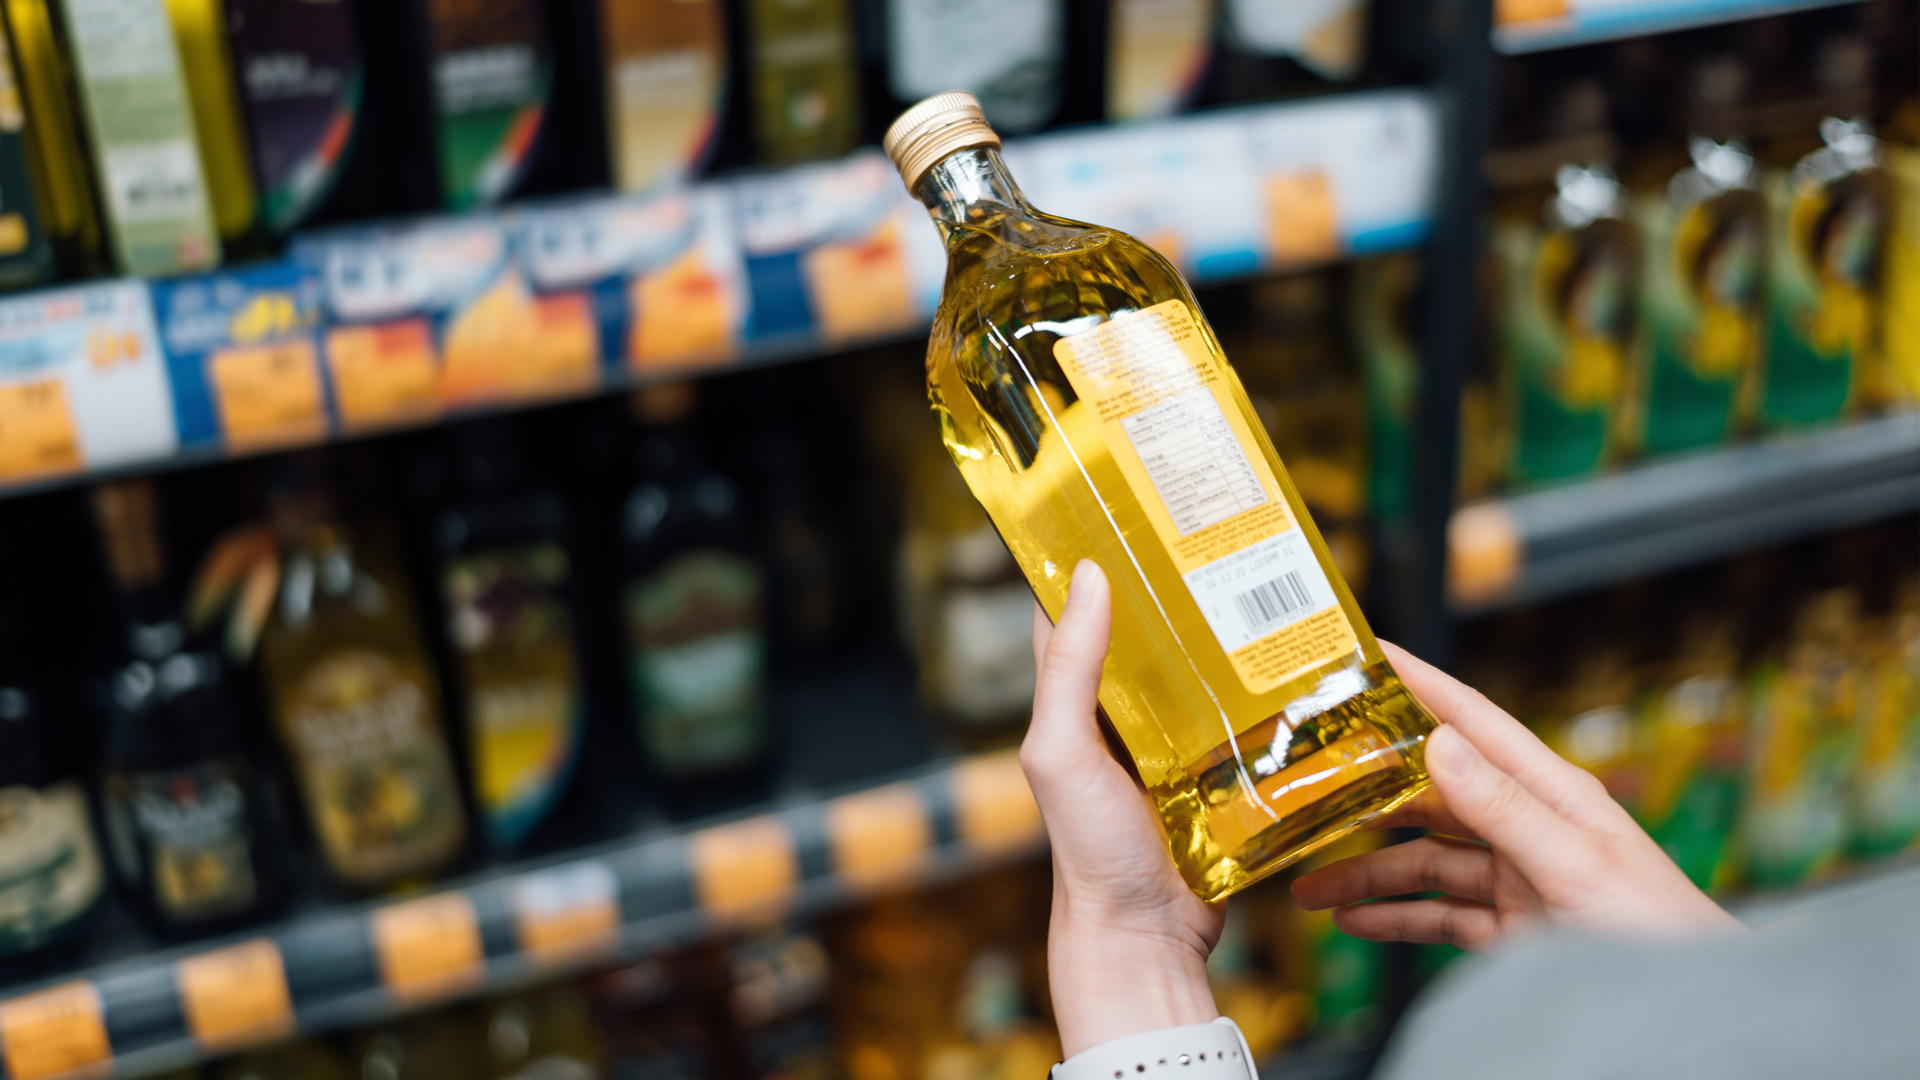 What are the healthiest cooking oils? | Live Science